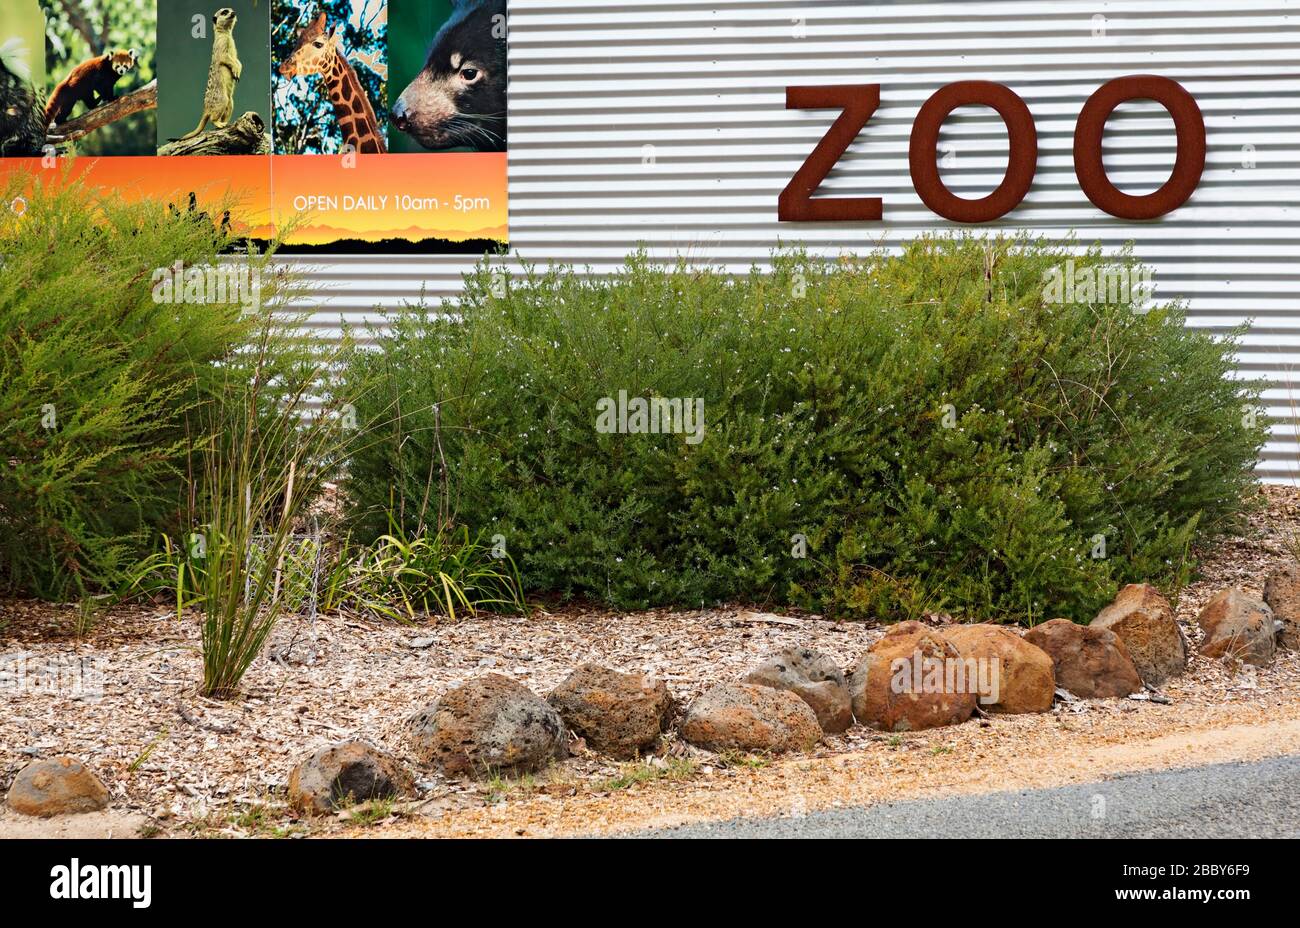 Zoos /  Entrance to Halls Gap Zoo, Victoria Australia. Halls Gap Zoo is the largest regional zoo and covers an area of 53 acres.It is situated at the Stock Photo